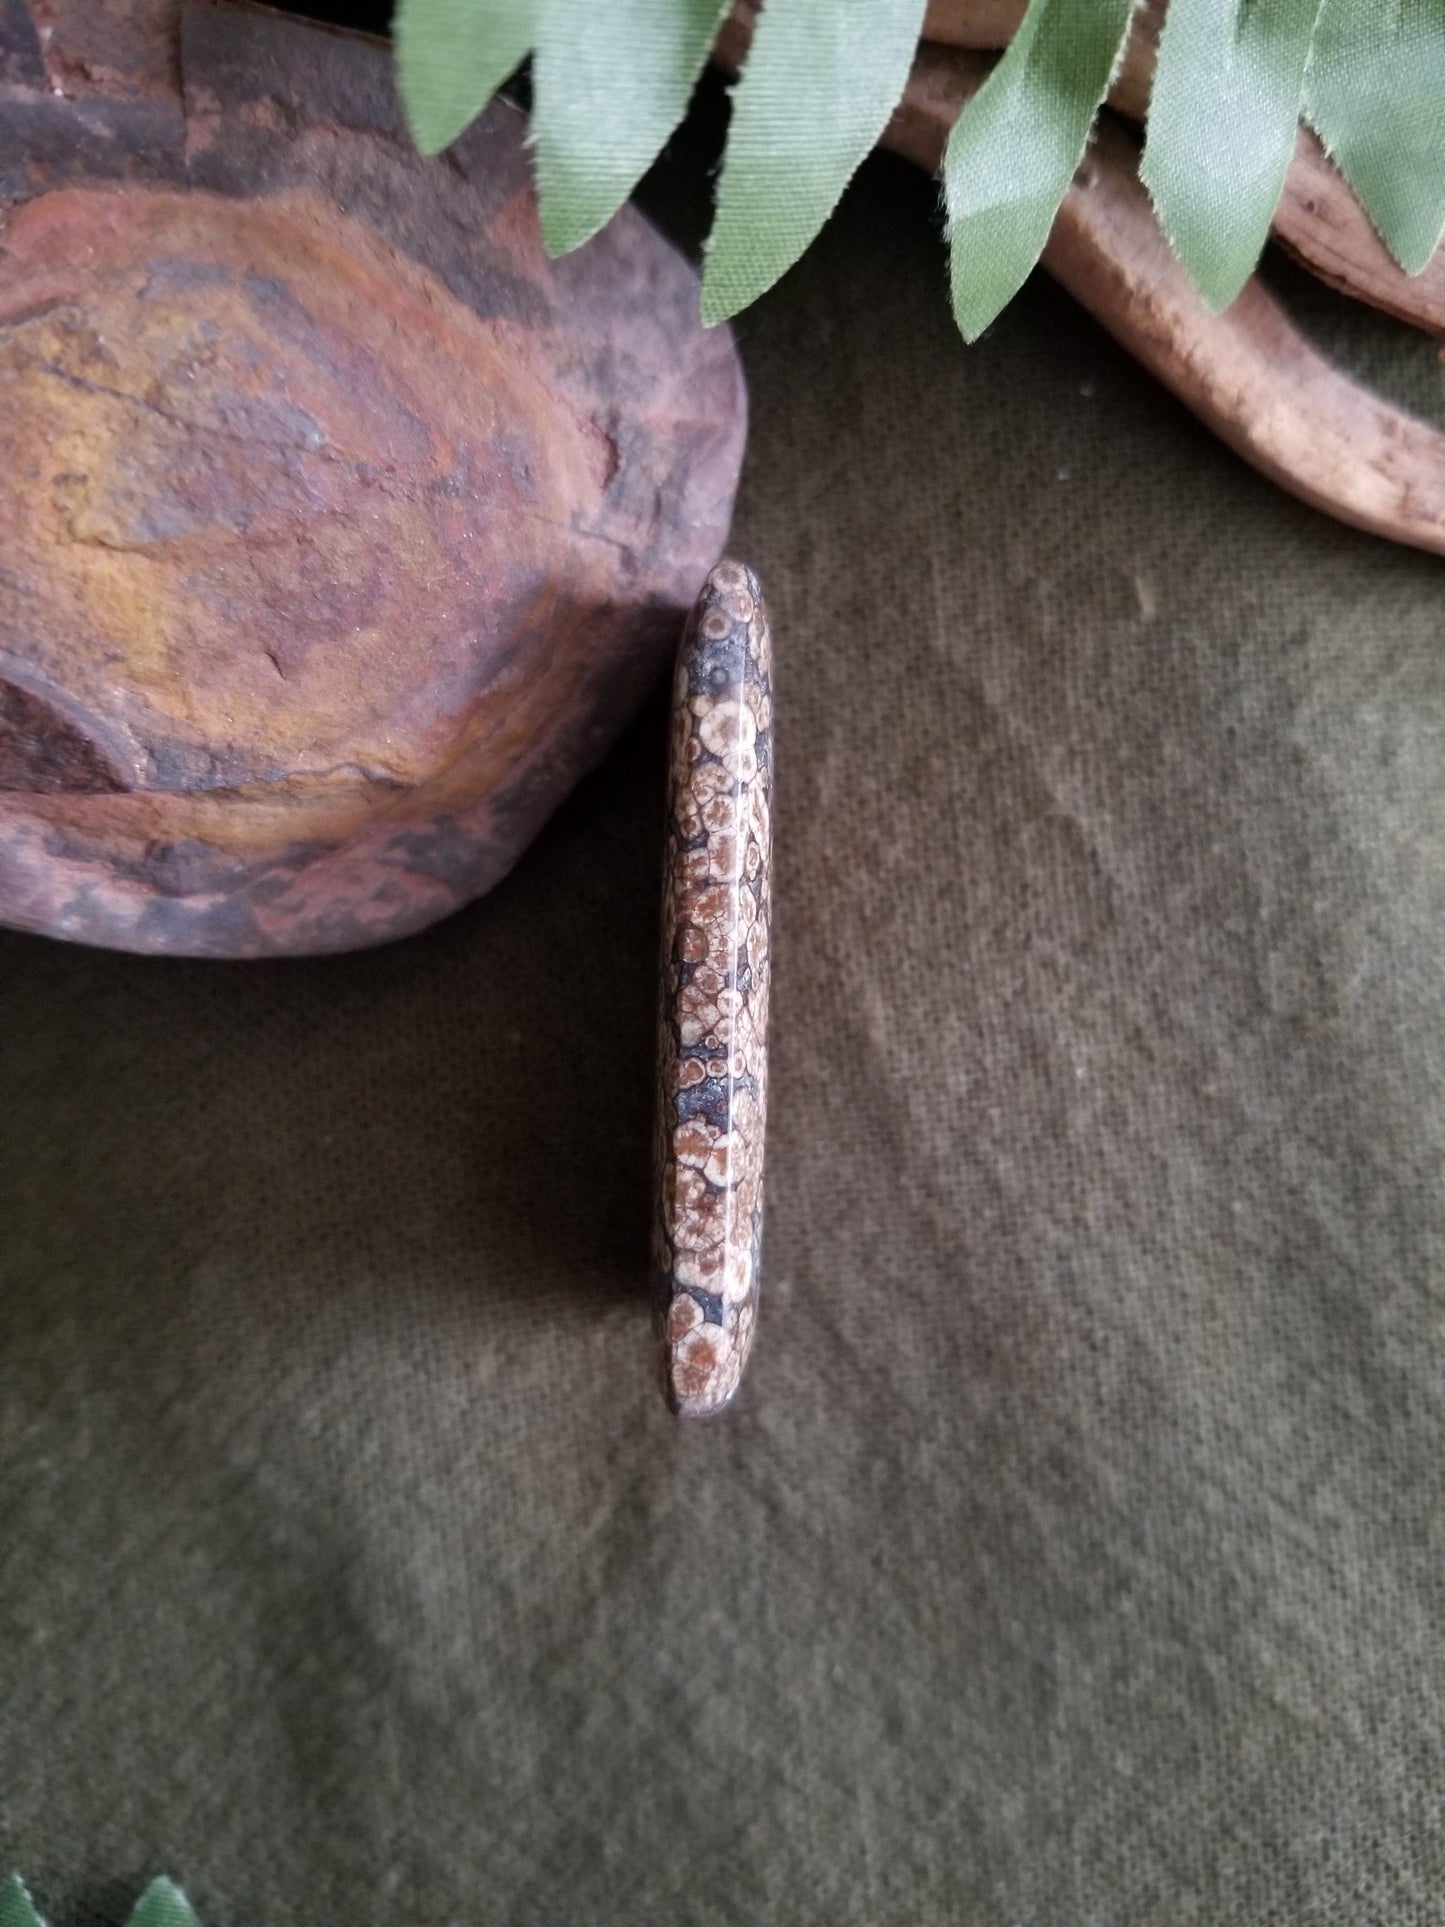 Fossilized coral rectangular bead with black, grey, and brown tones.